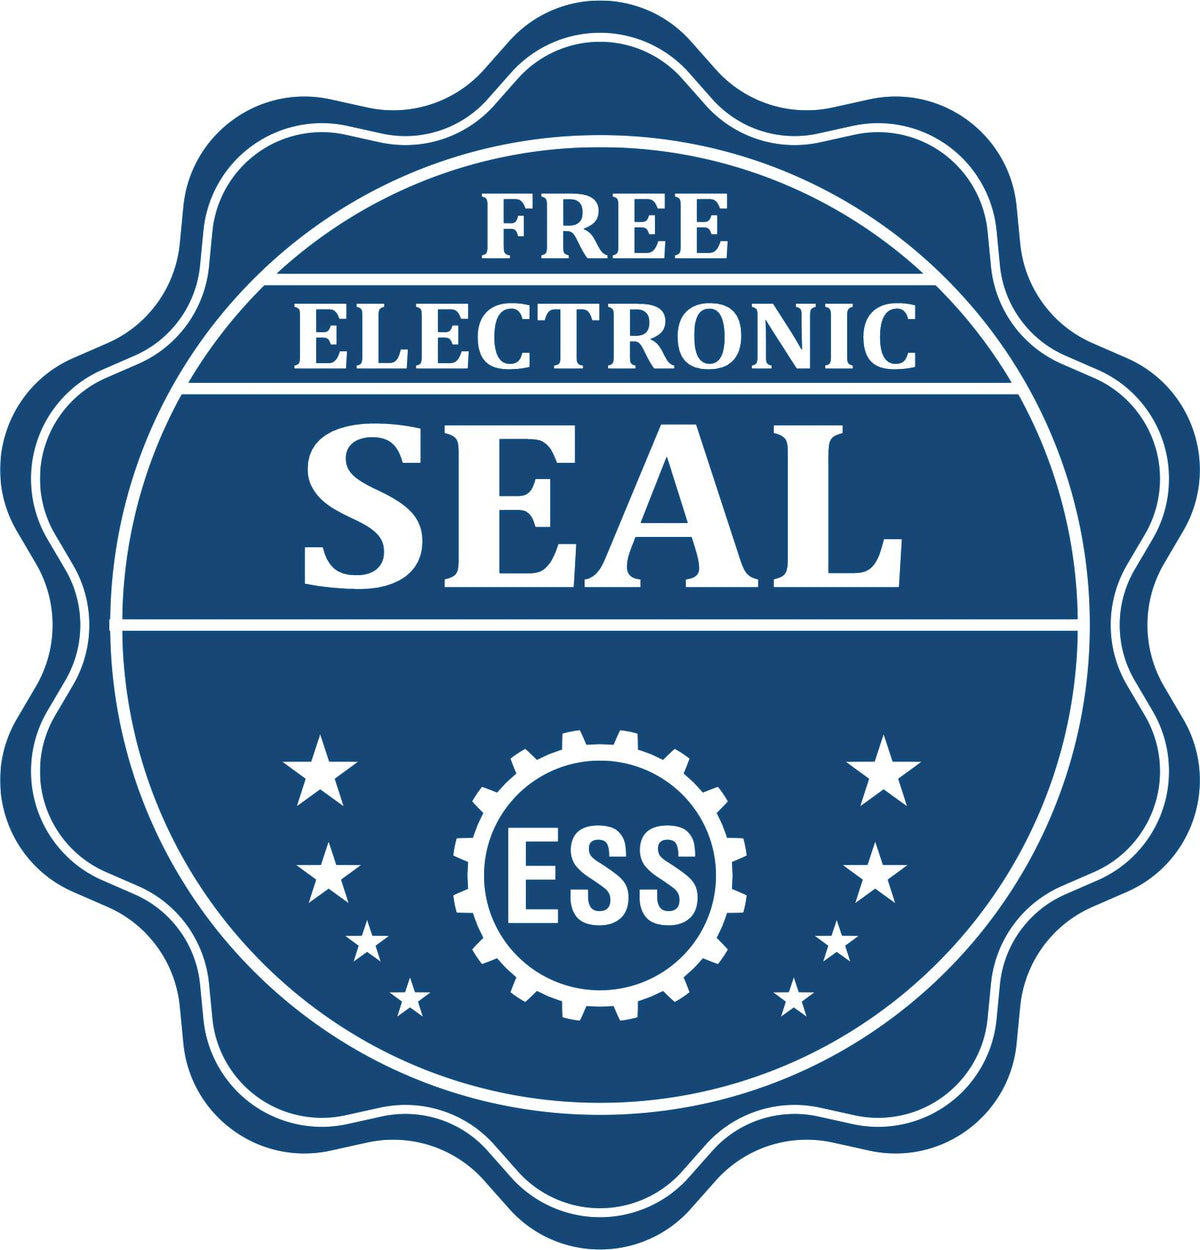 A badge showing a free electronic seal for the Premium MaxLight Pre-Inked Kansas Geology Stamp with stars and the ESS gear on the emblem.